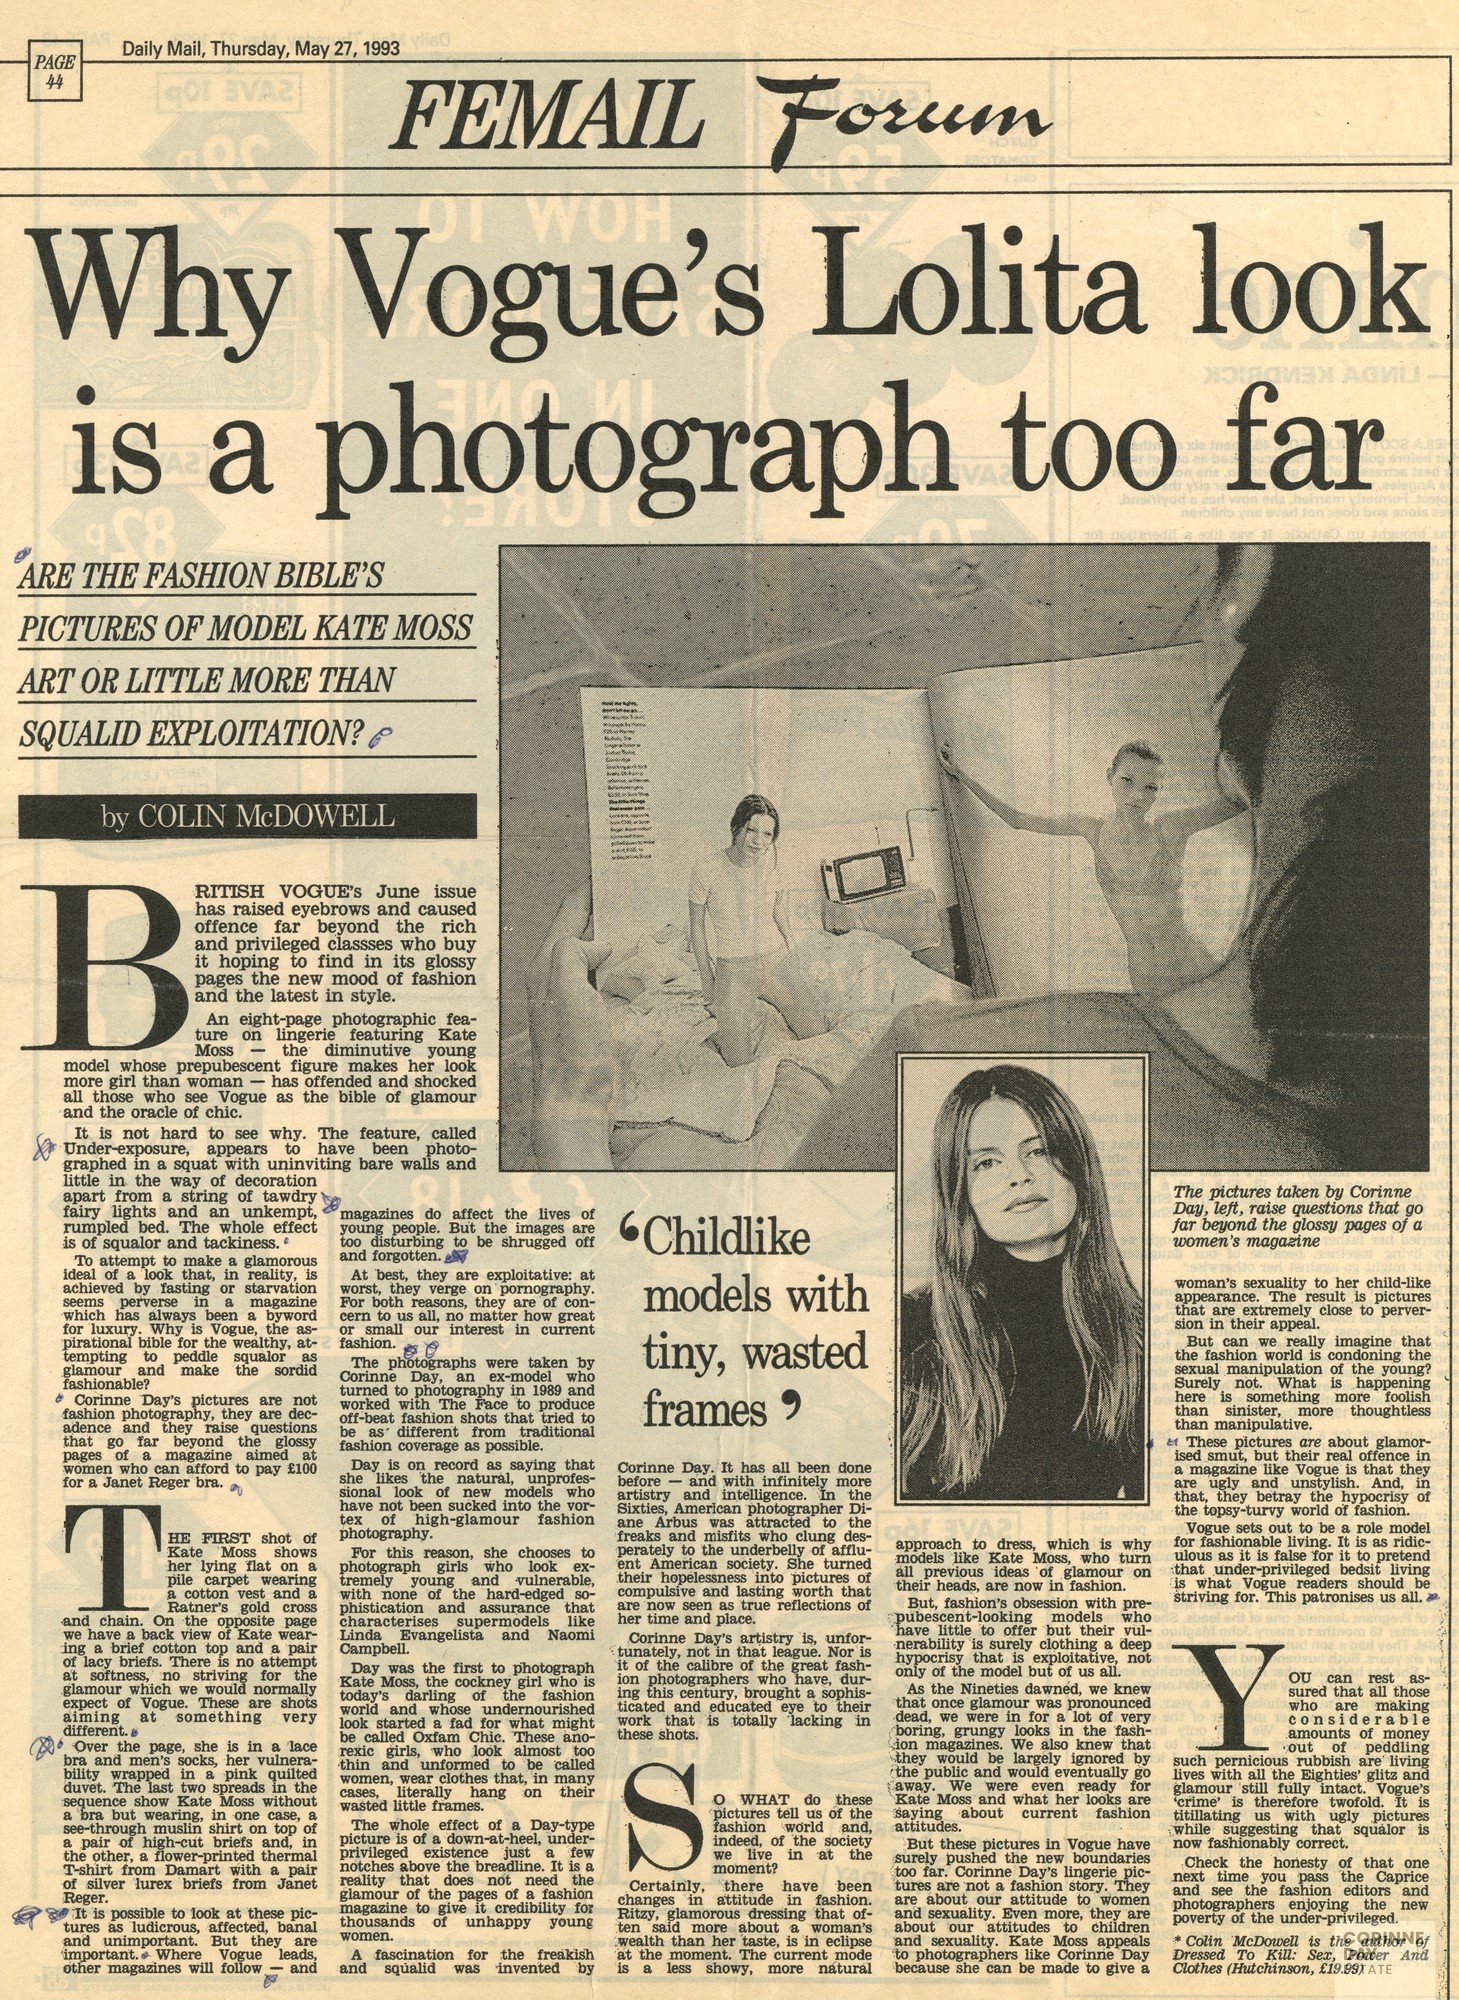 Why Vogue's Lolita look is a photograph too far, Daily Mail, 27 May 1993 — Image 1 of 1